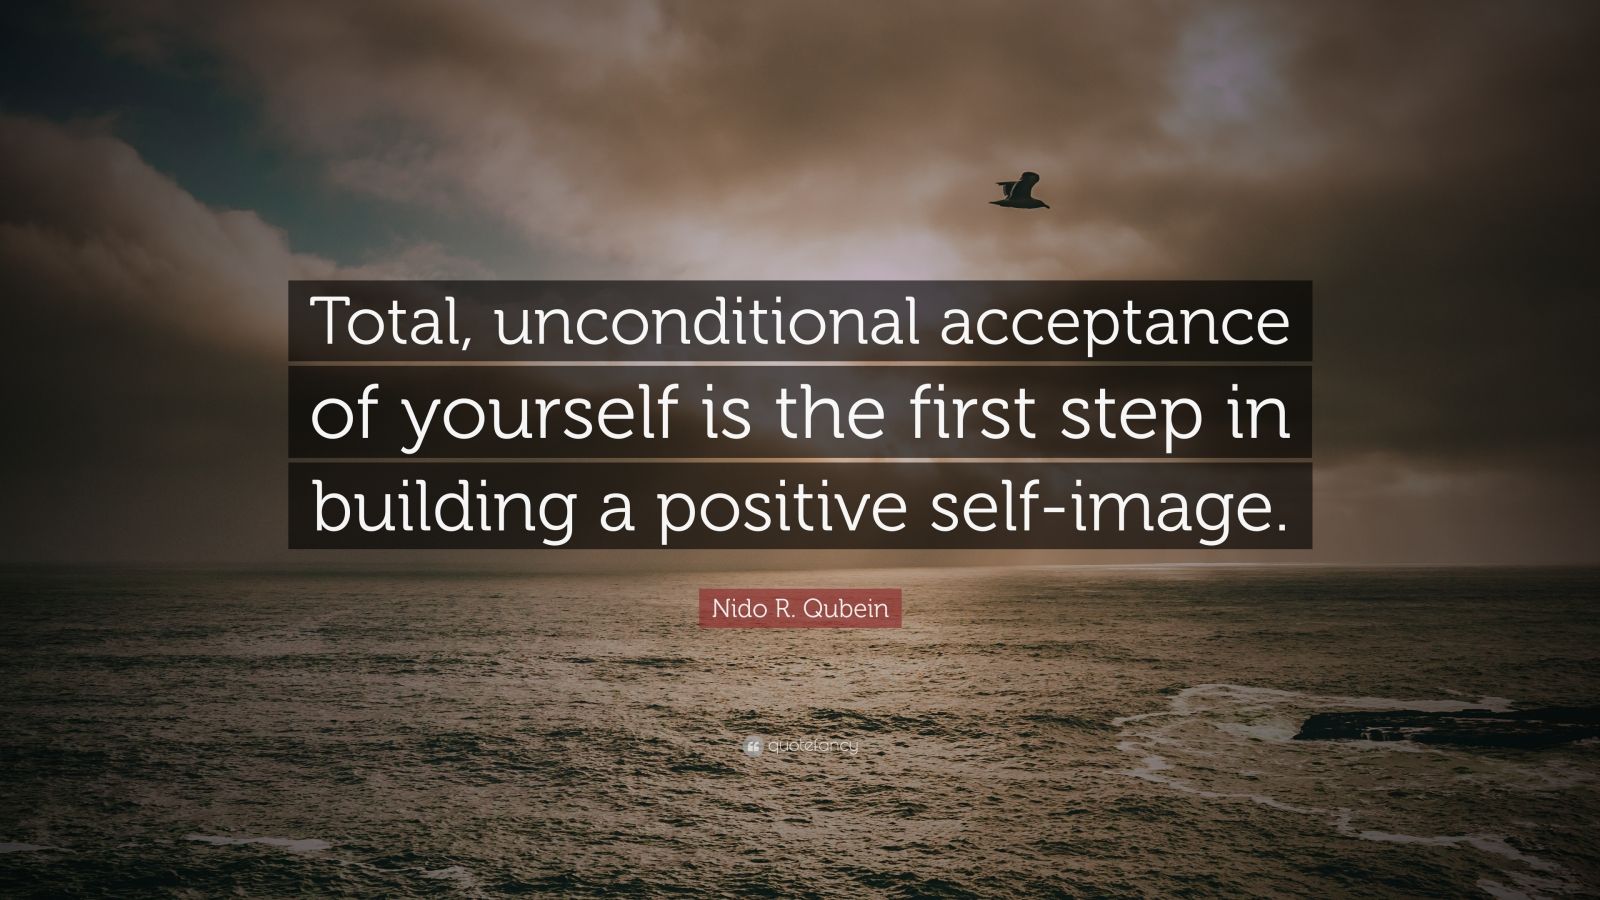 Nido R. Qubein Quote: “Total, unconditional acceptance of yourself is ...